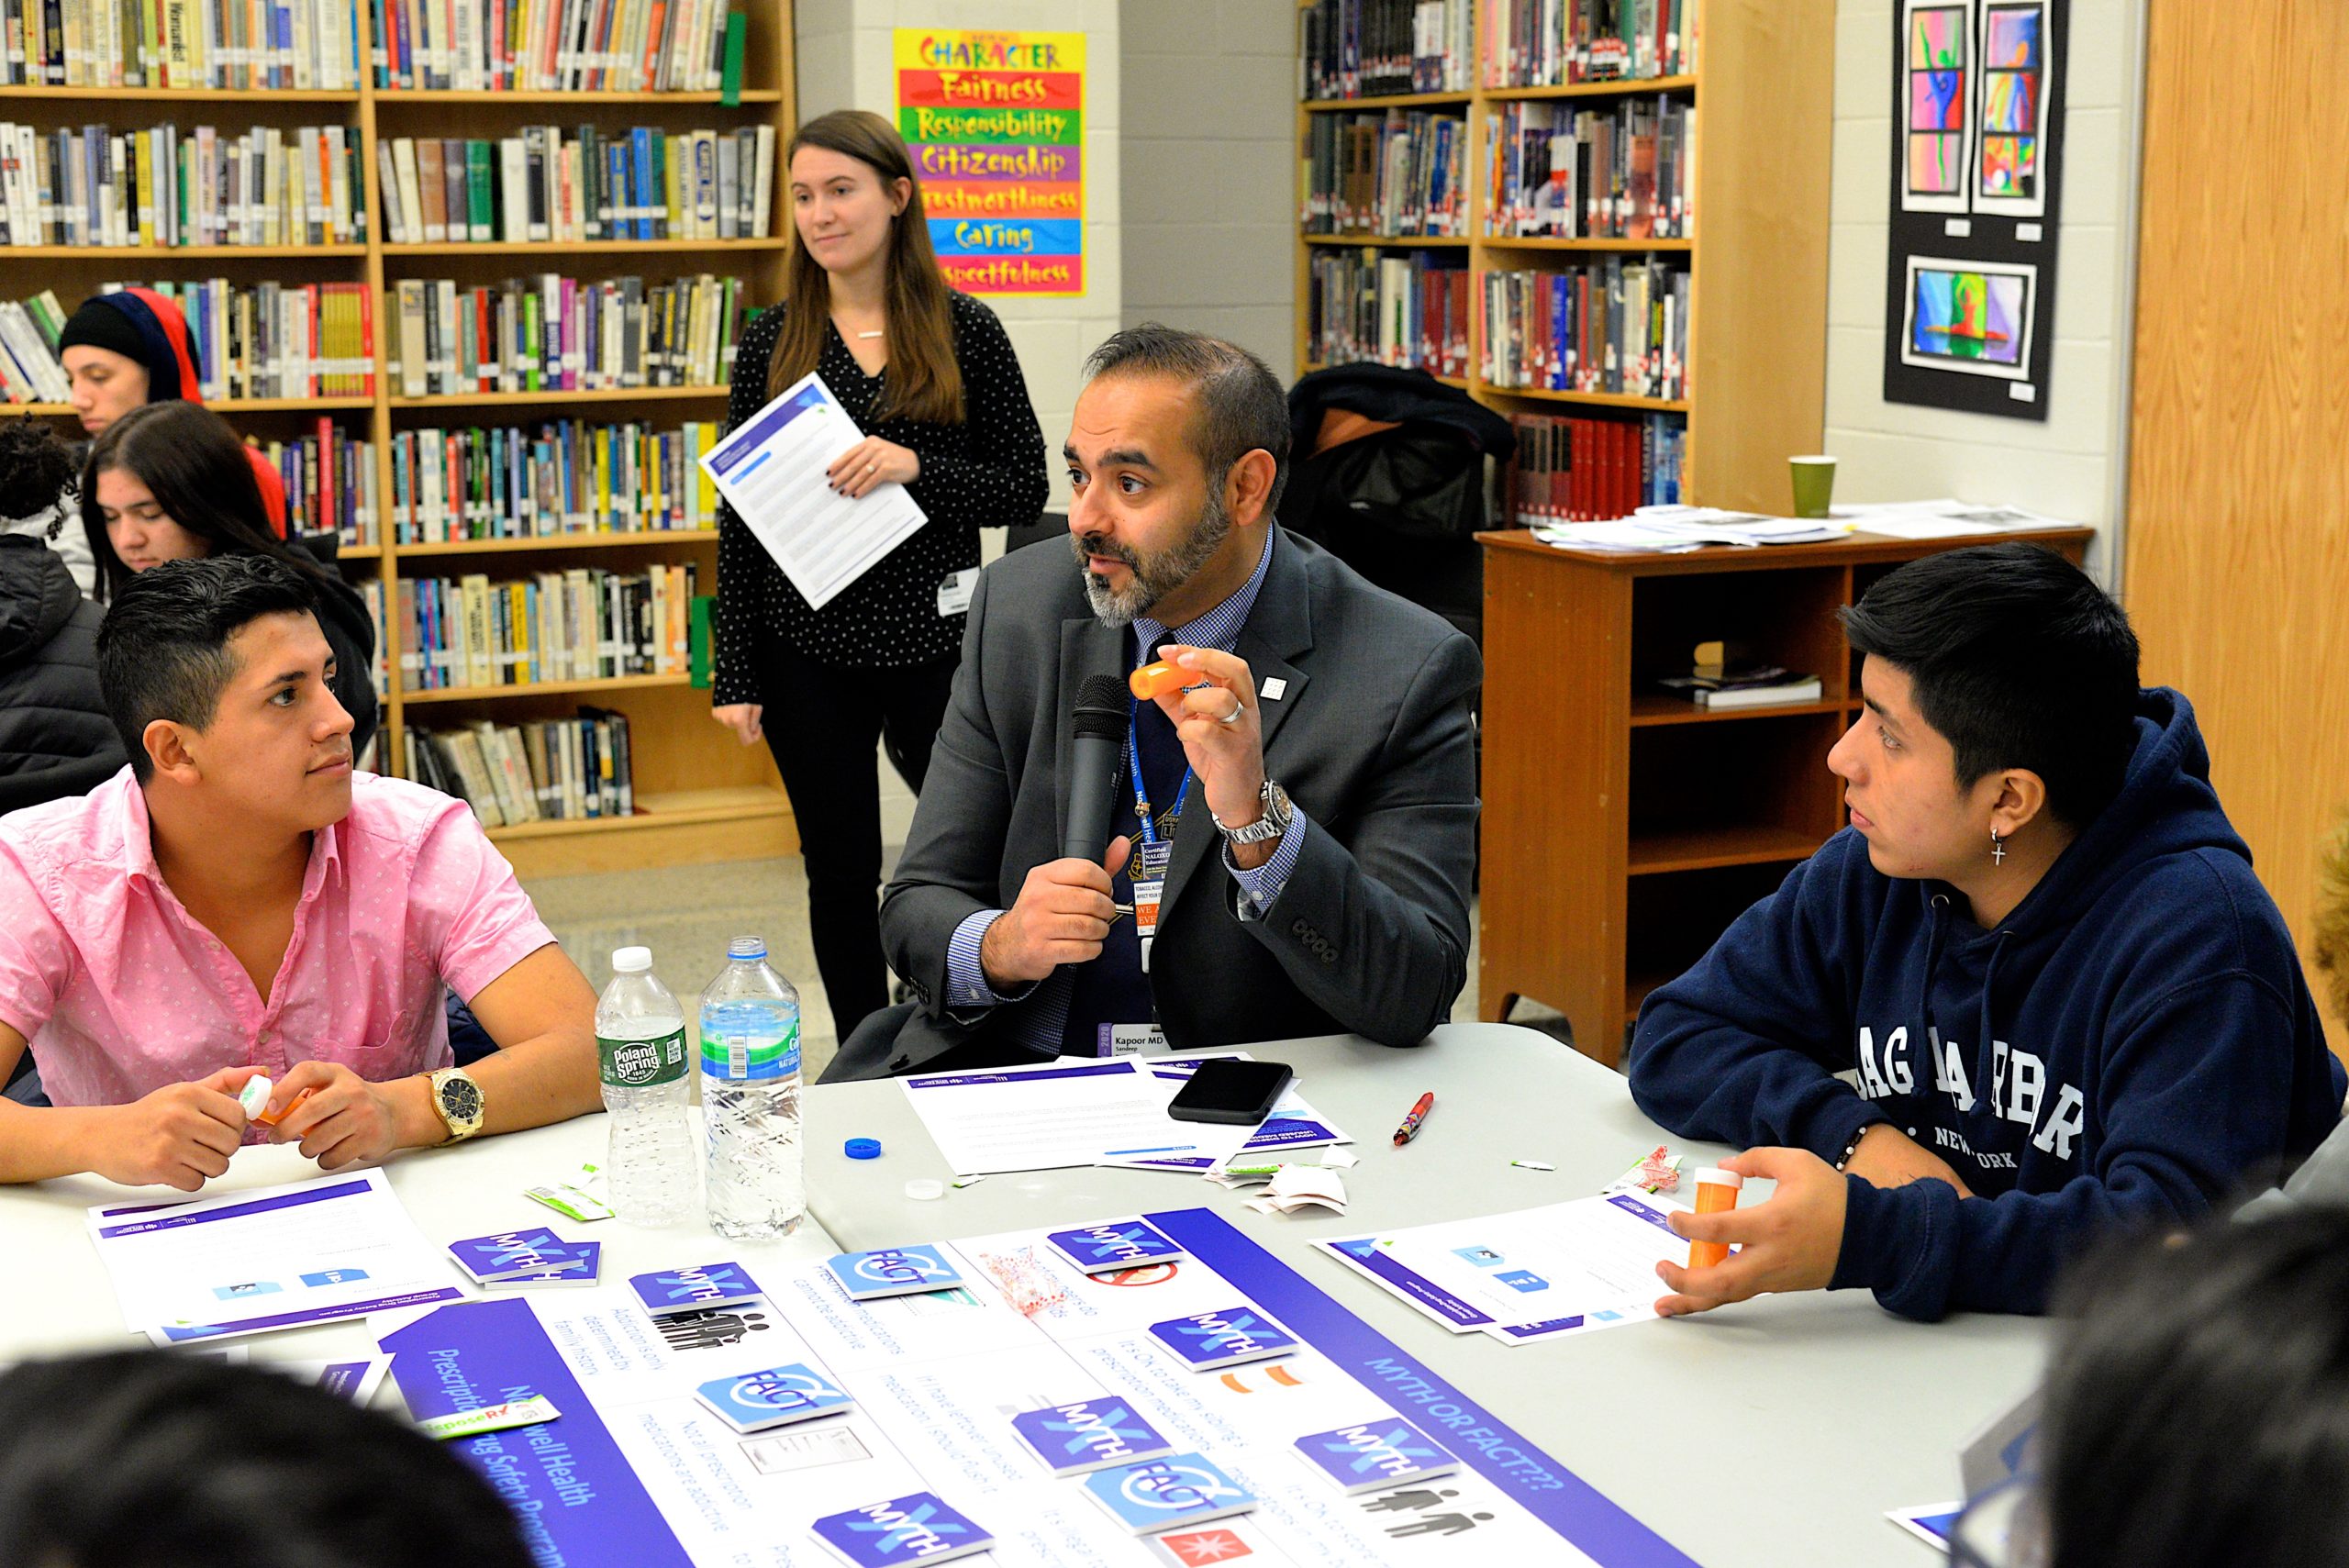 Sandeep Kappor, MD, leads students at one table in a discussion of prescription drug 